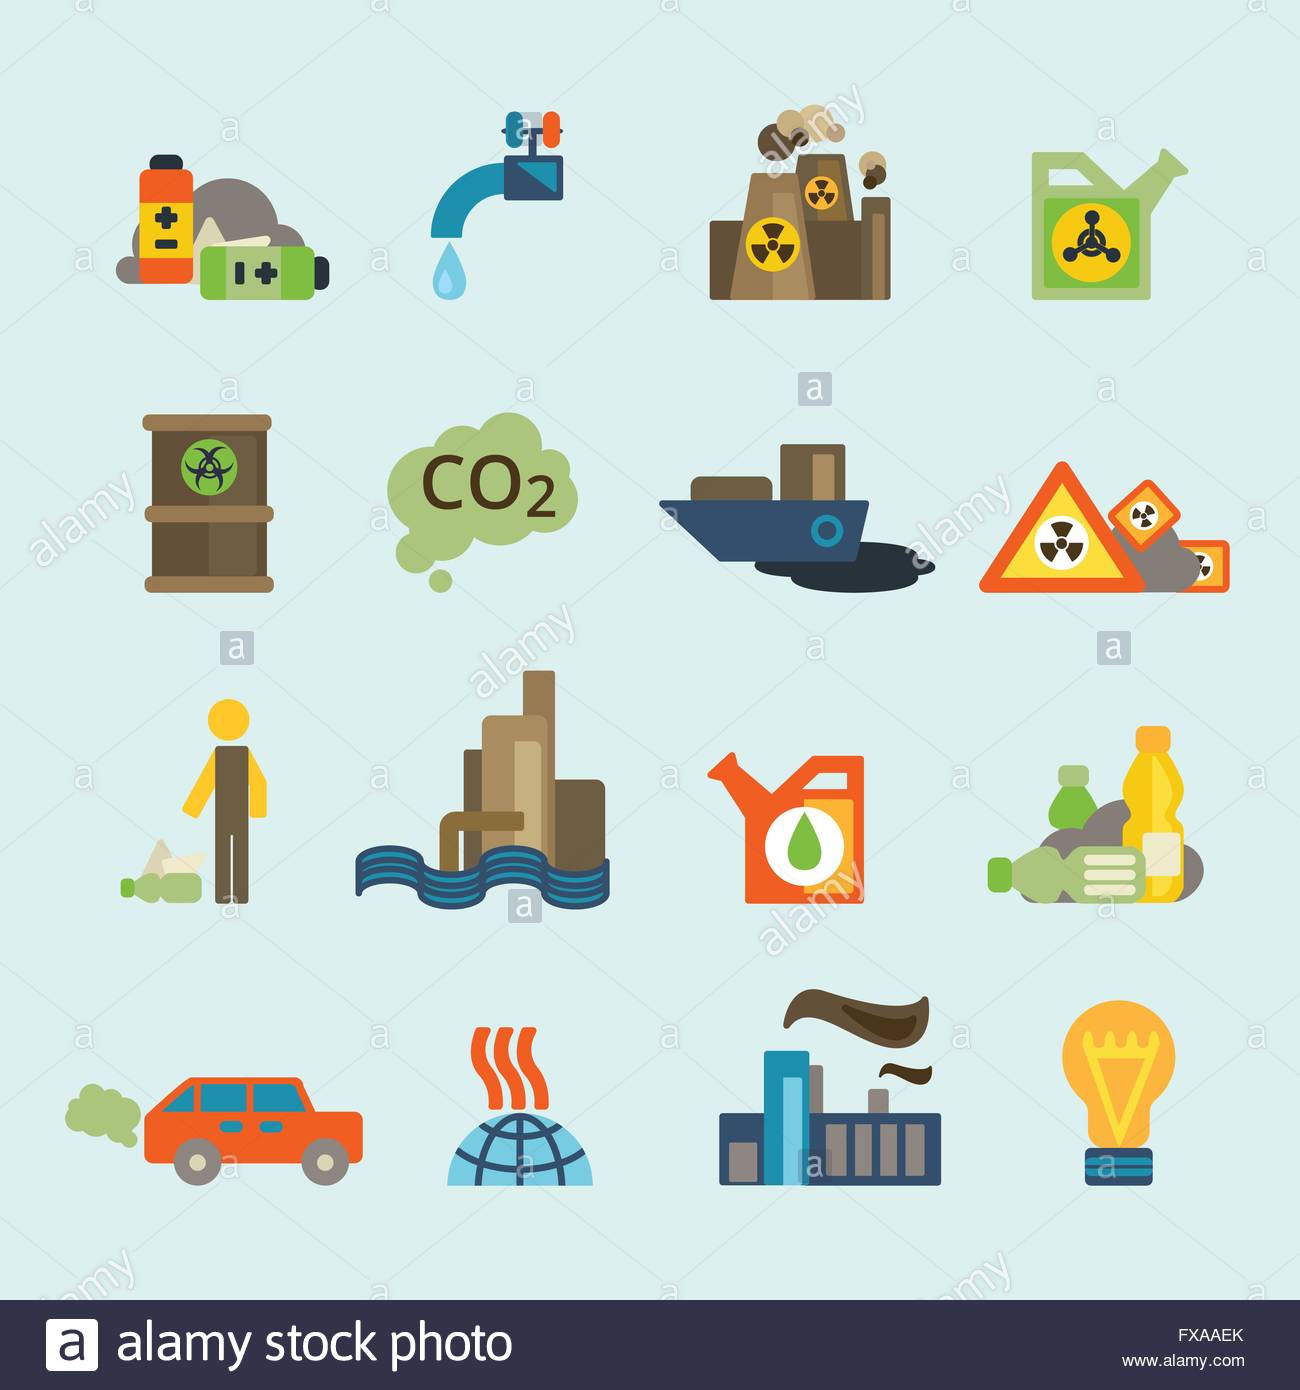 Pollution icons | Noun Project